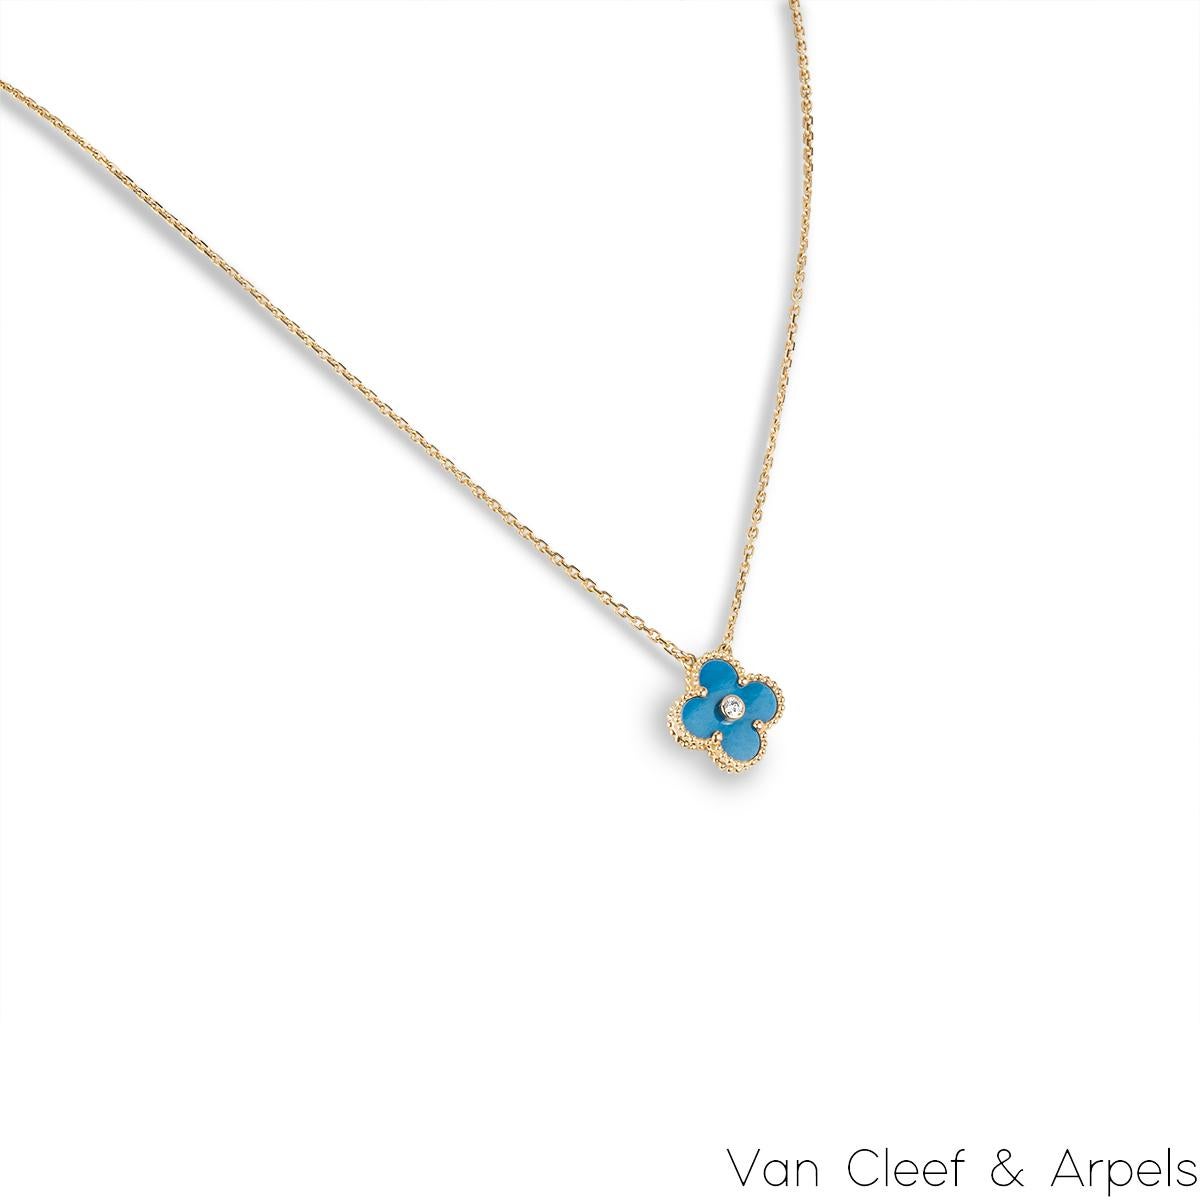 A limited edition 18k yellow gold Celestial Blue porcelain Van Cleef & Arpels Vintage Alhambra pendant from the 2019 Holiday collection. The pendant features a beaded edge 4 leaf clover motif with a Celestial Bleu de Sèvres porcelain inlay. Van